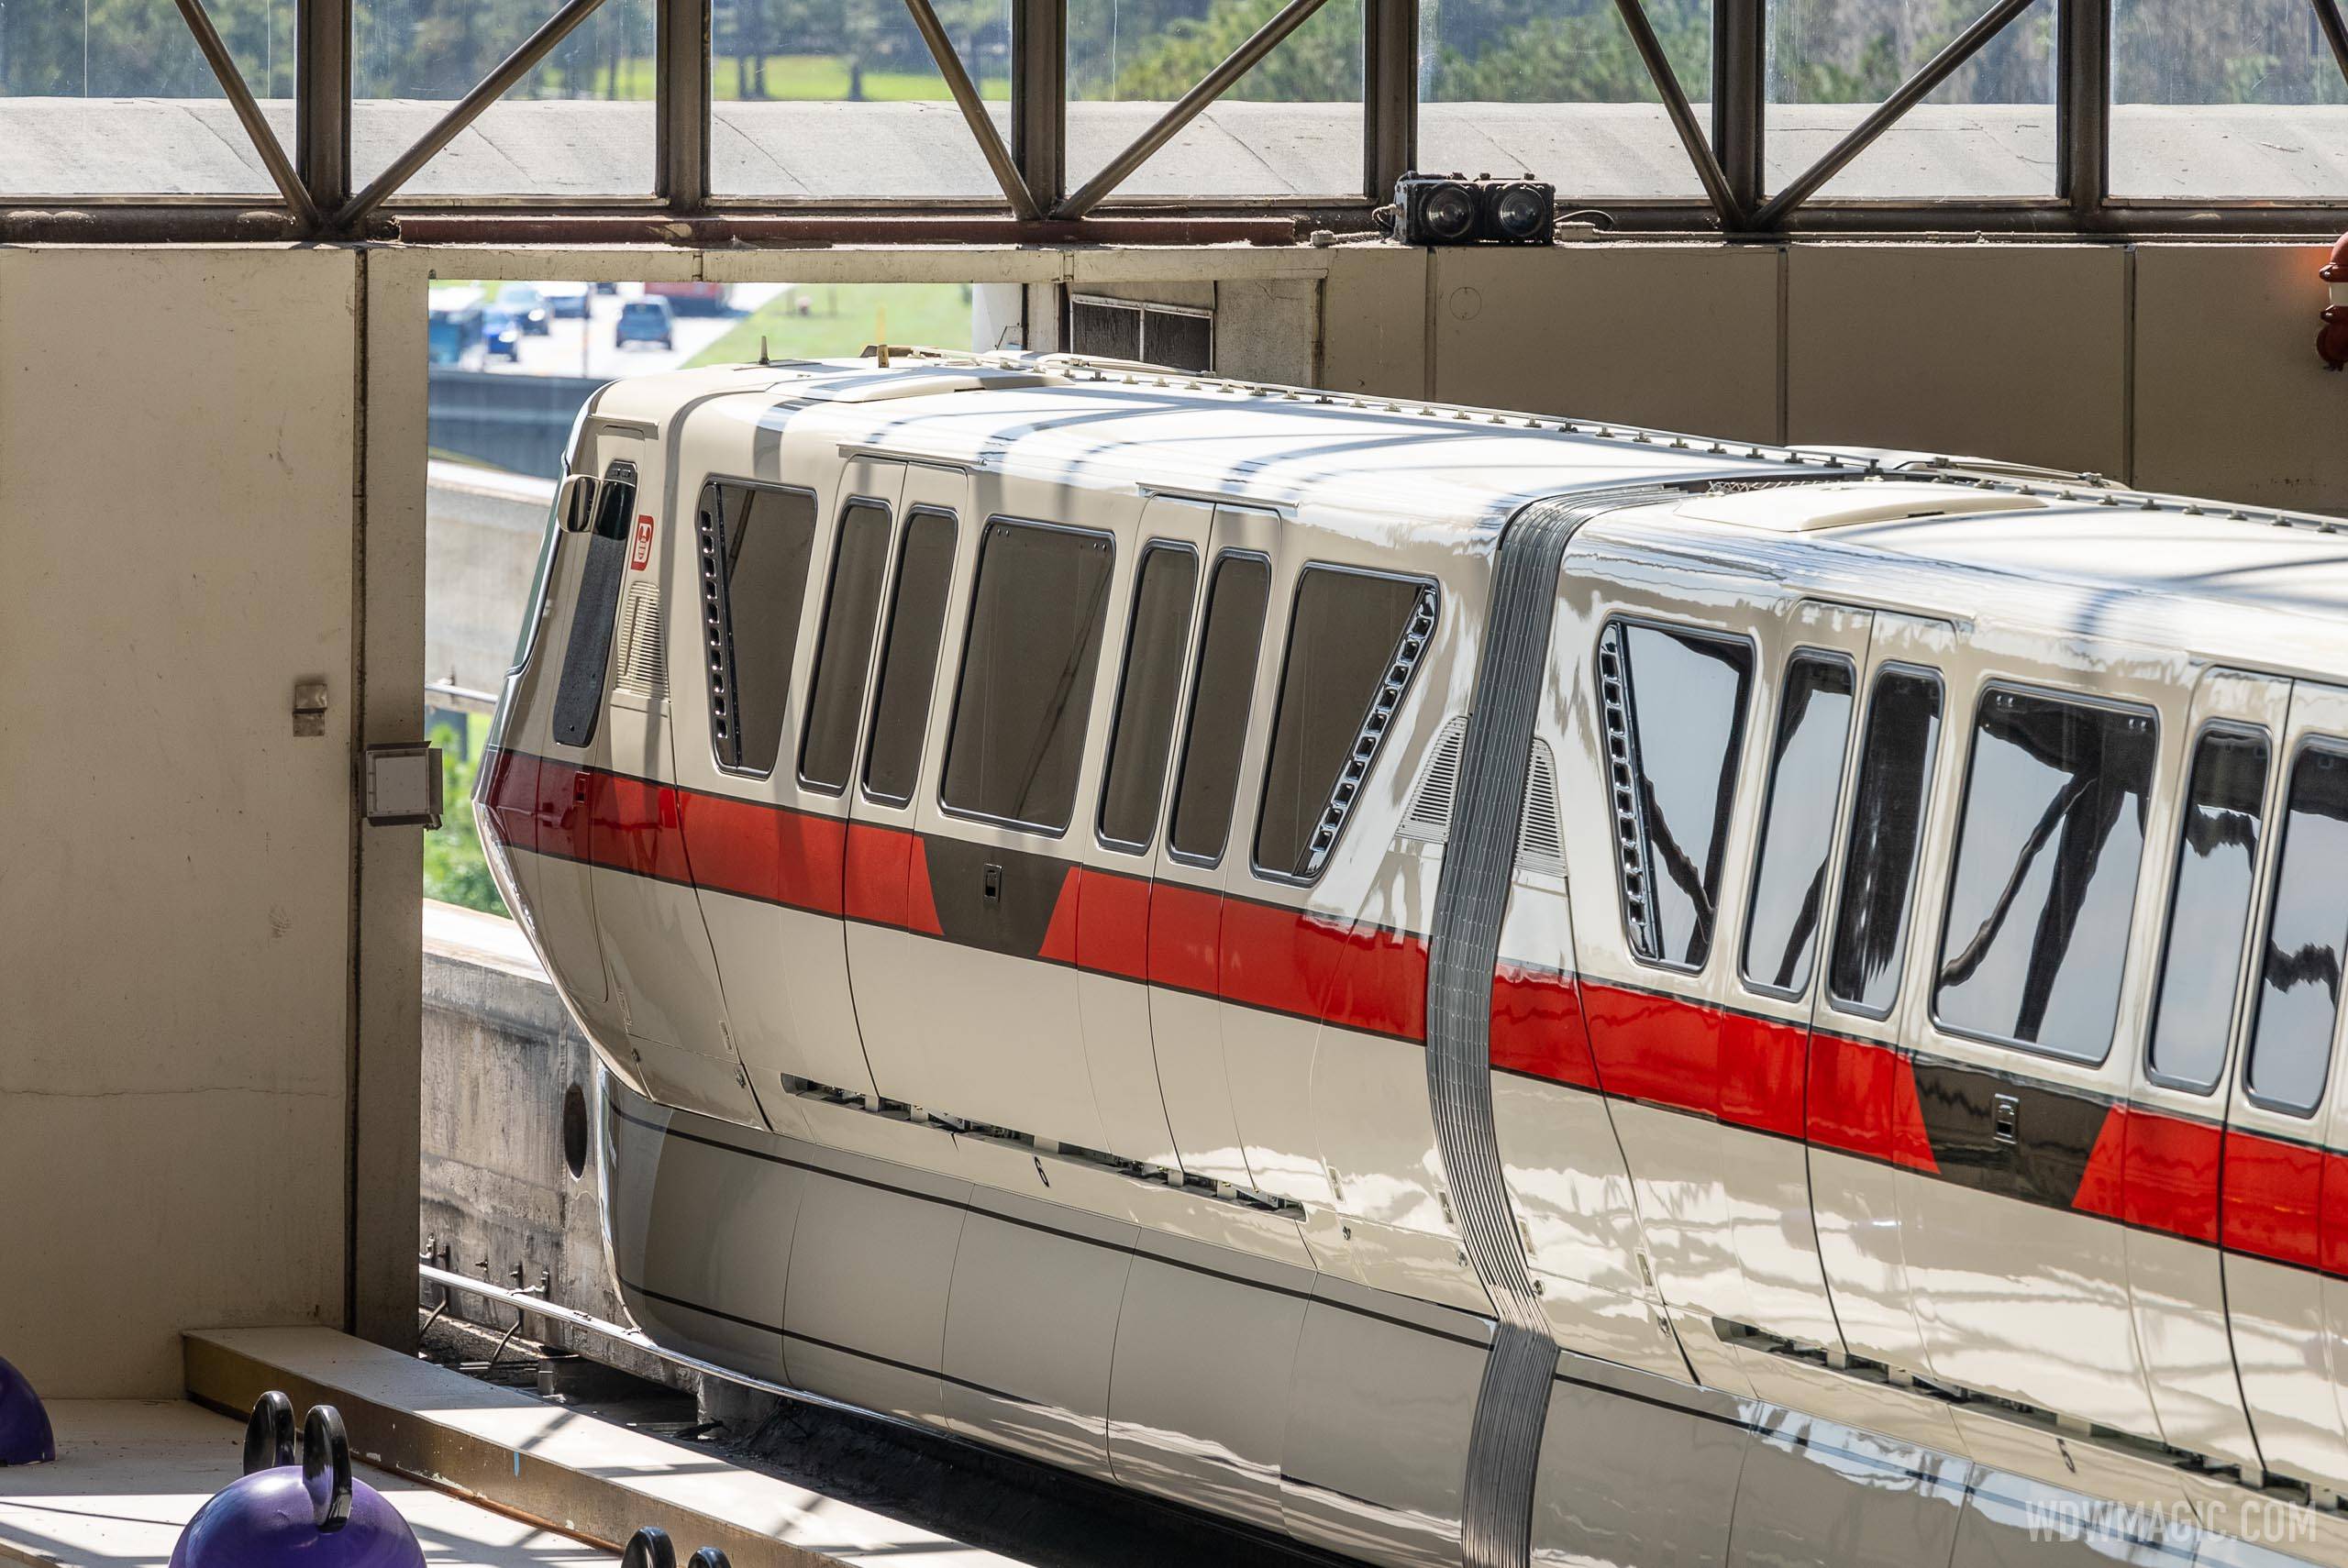 Repainted Monorail Red - February 2021